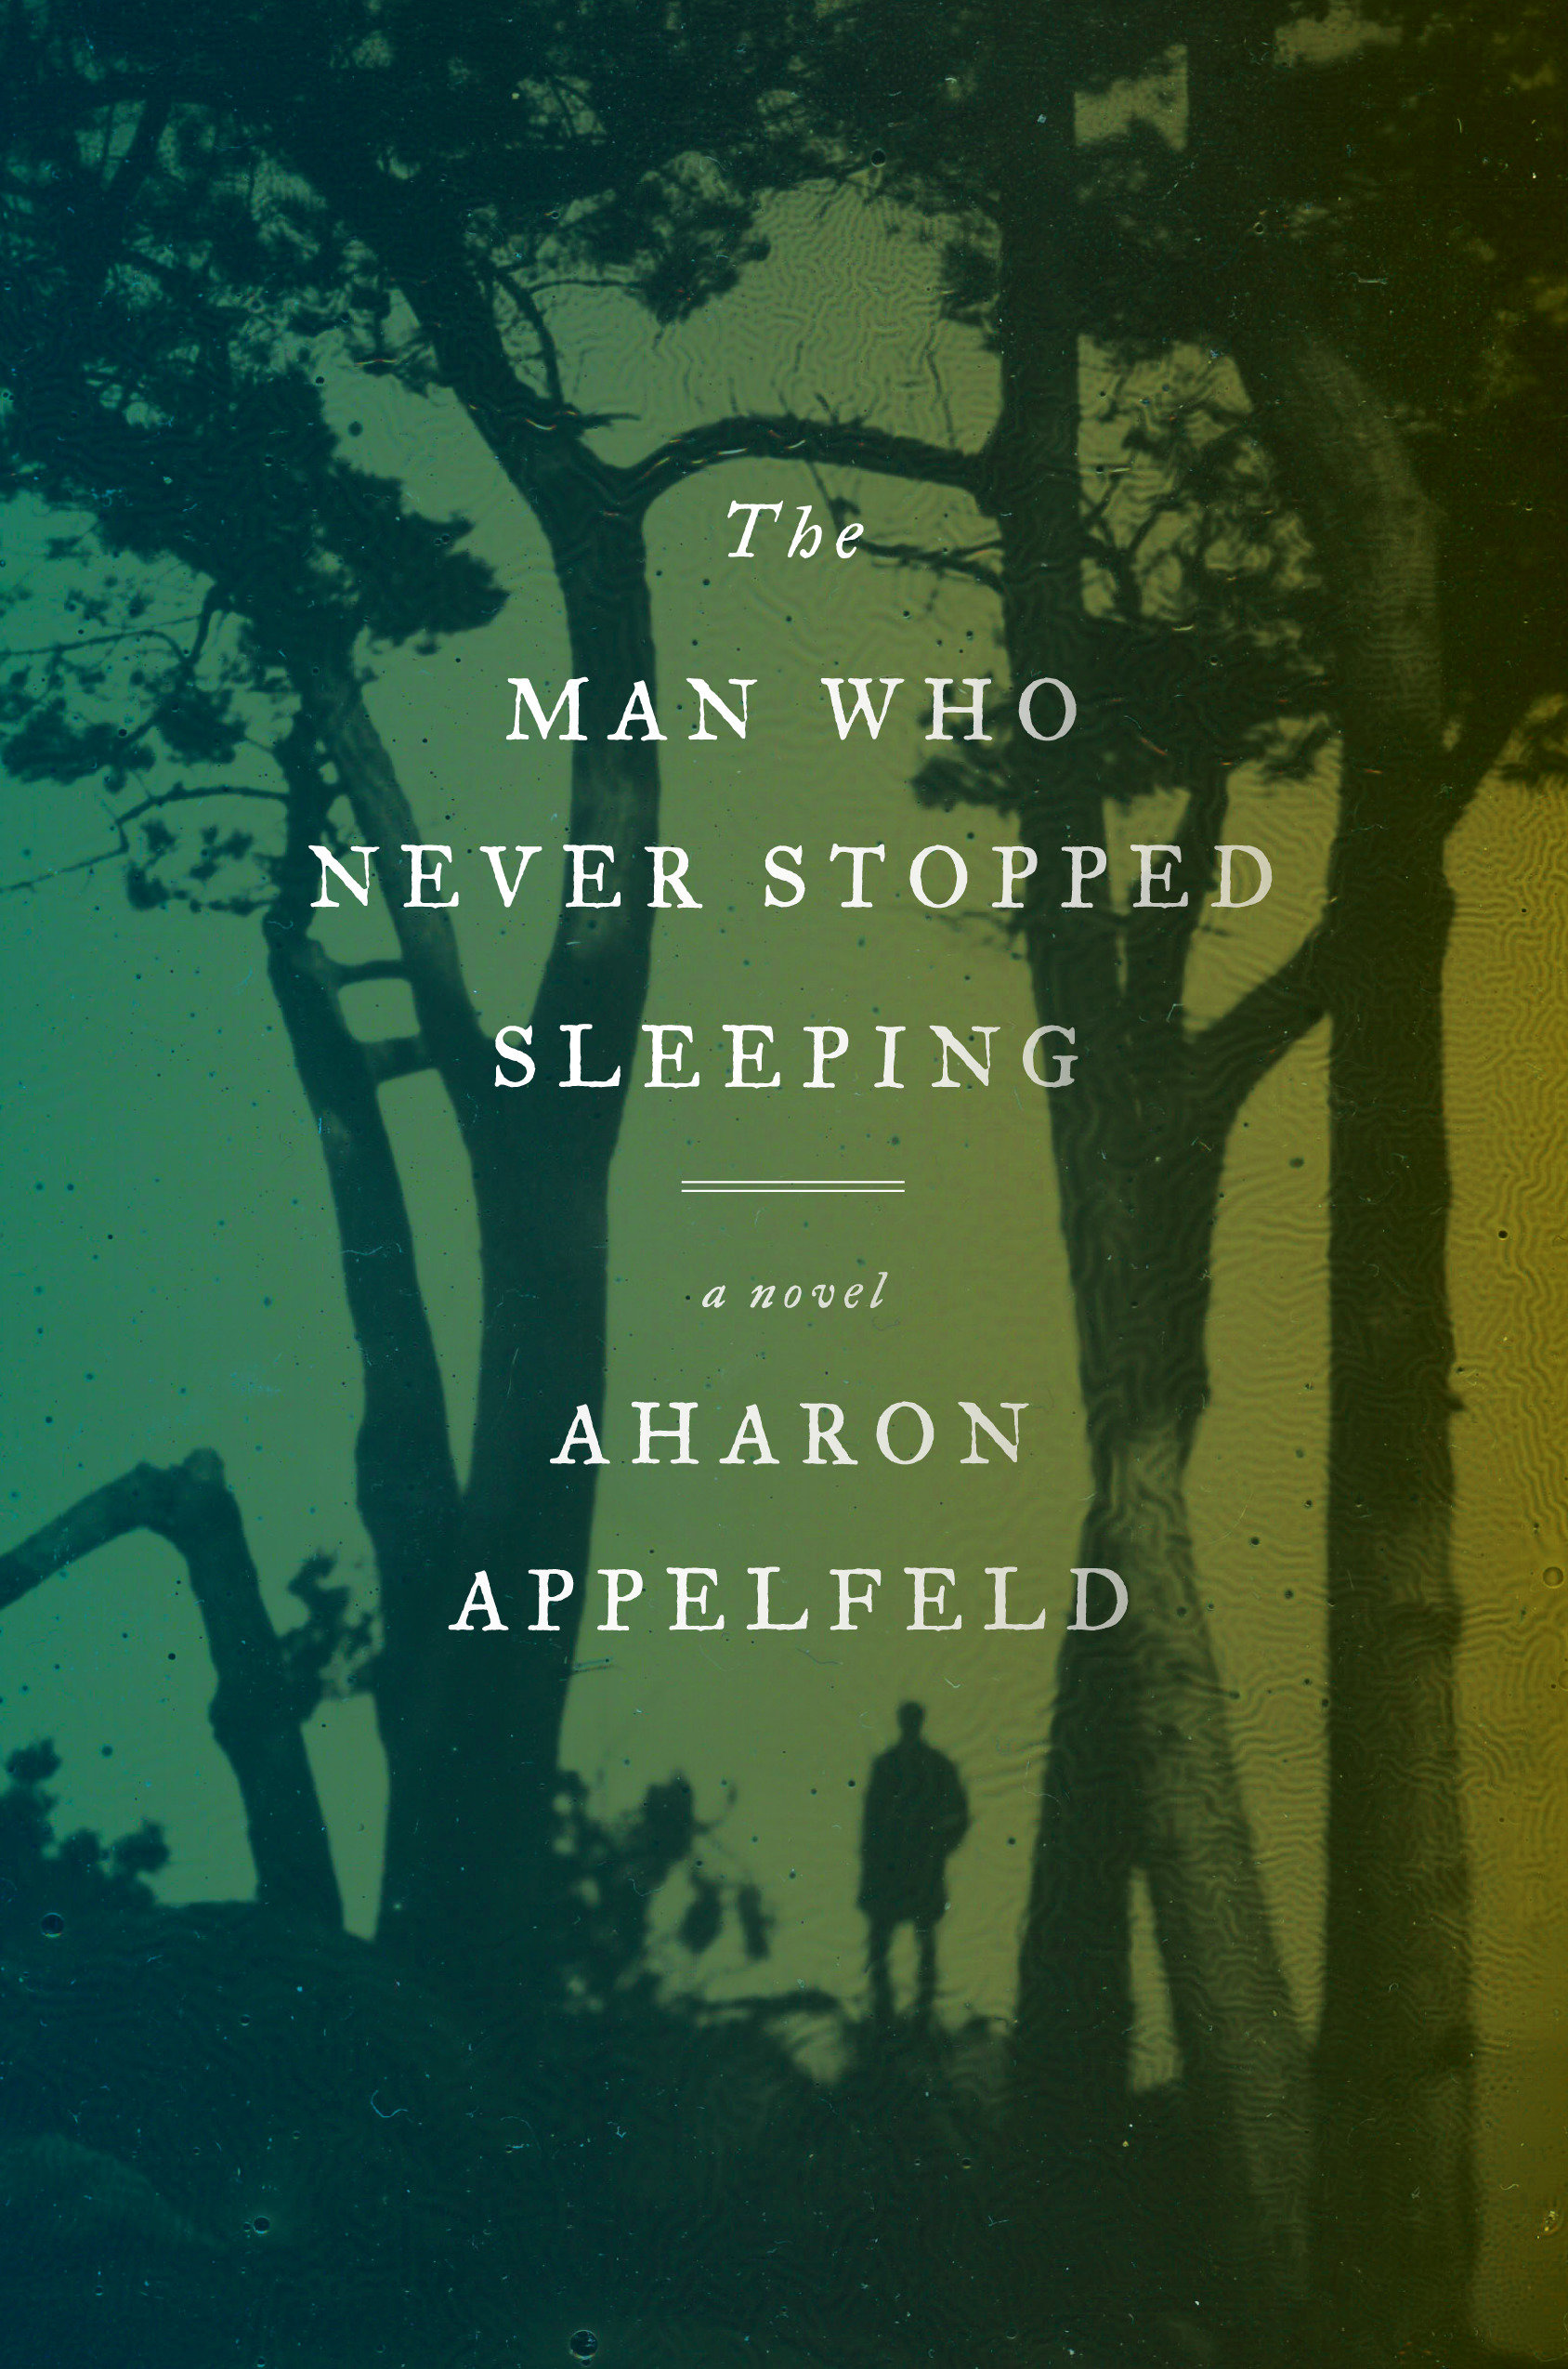 The Man Who Never Stopped Sleeping (Hardcover Book)